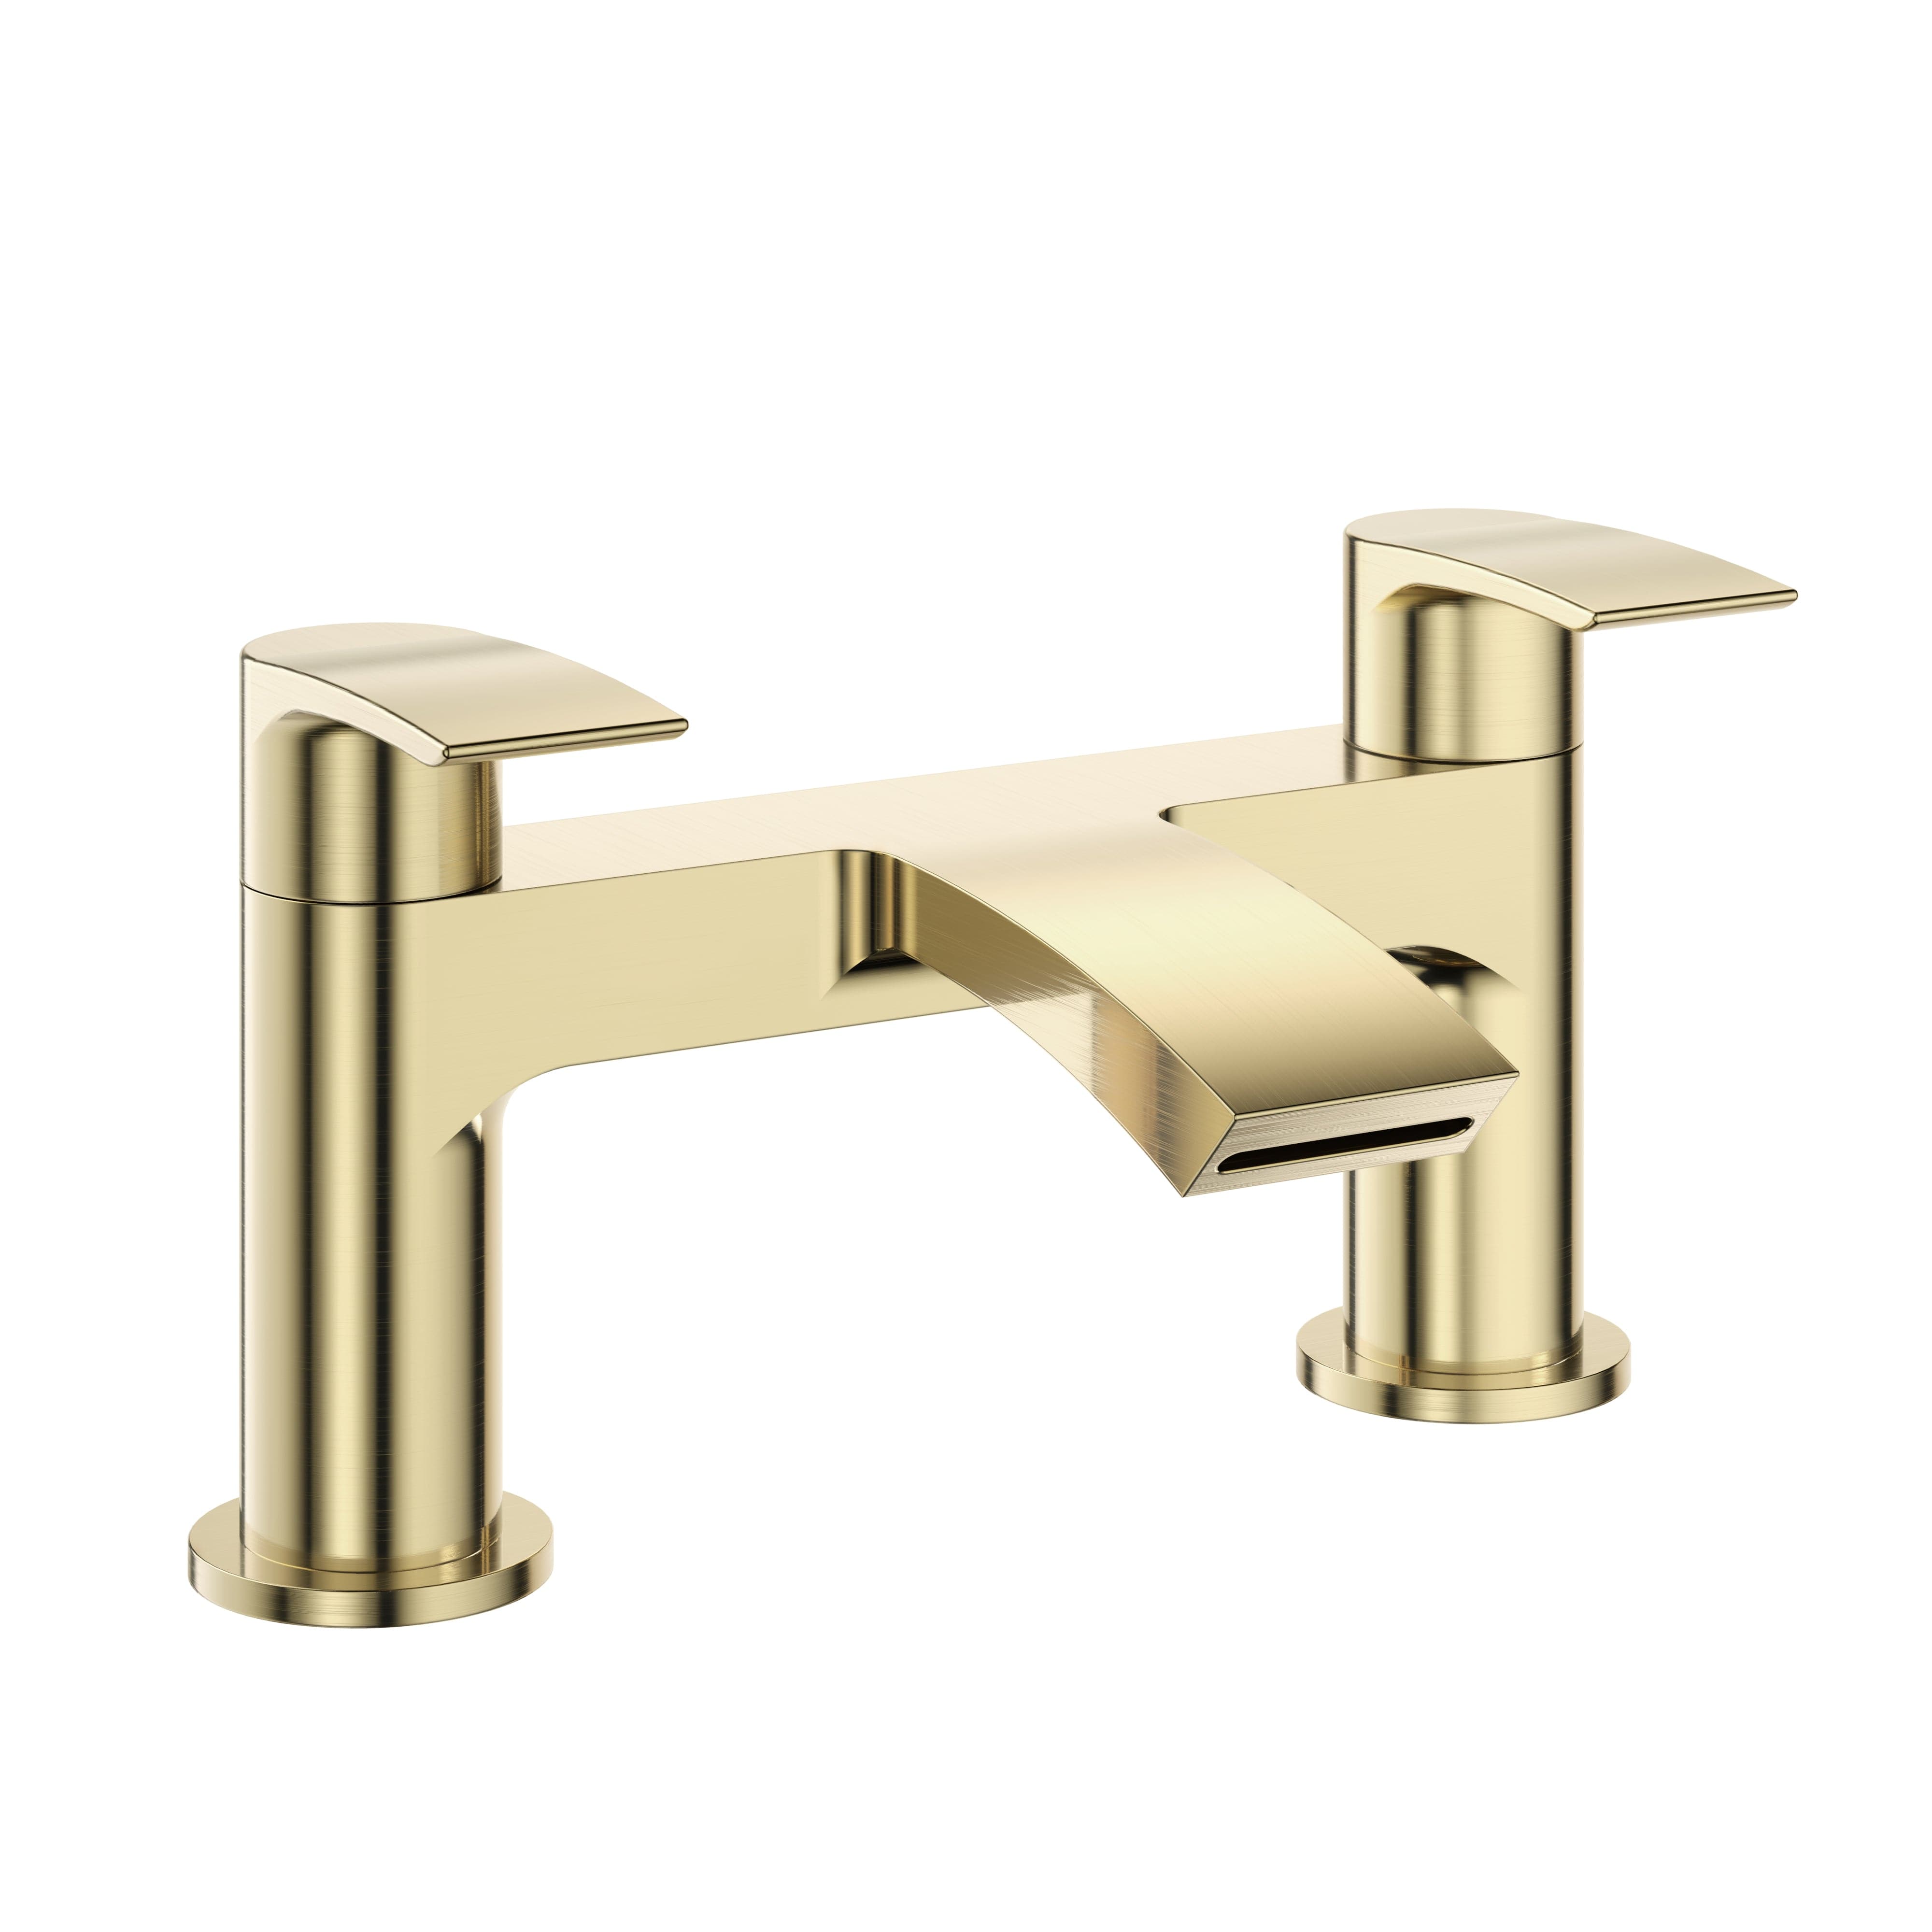 Carter Bath Filler - Brushed Brass, elegant design for modern bathrooms, durable finish. Buy now for luxury and style.